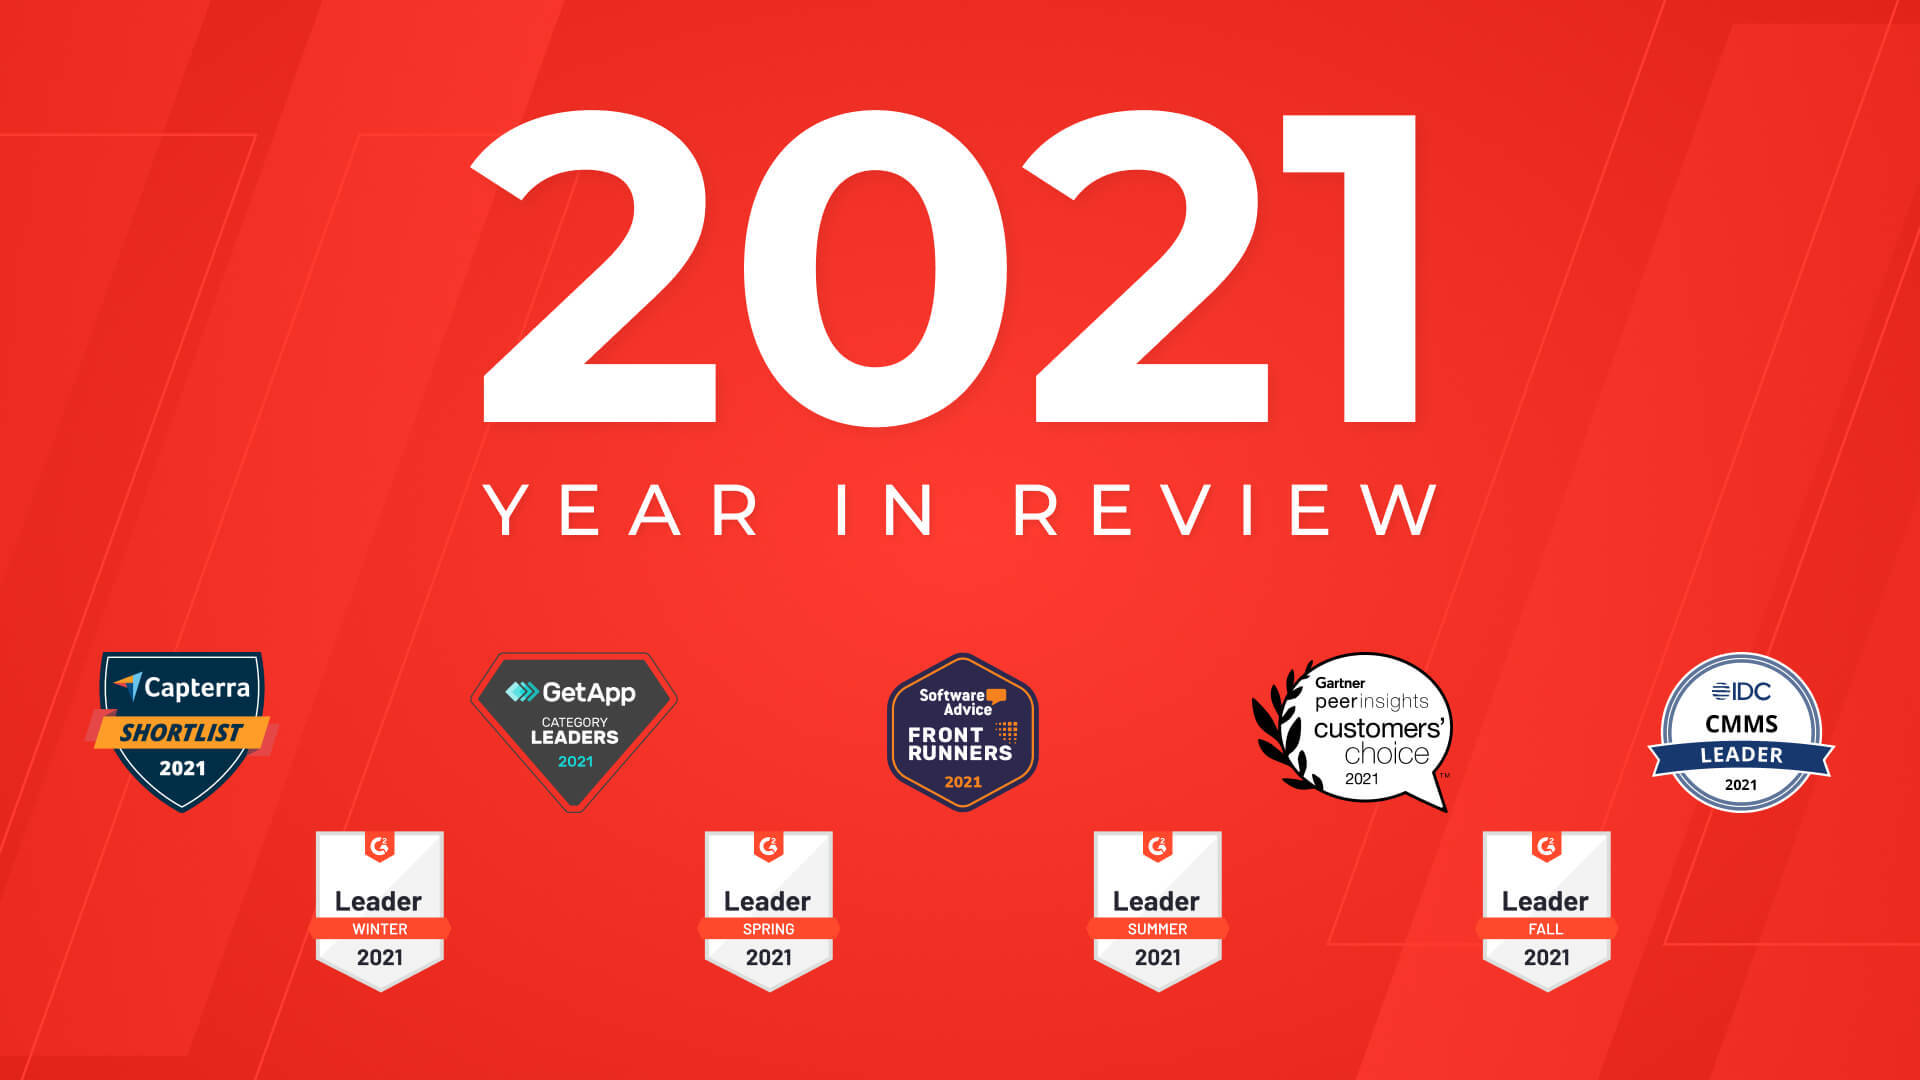 UpKeep 2021 Recognition Year in Review